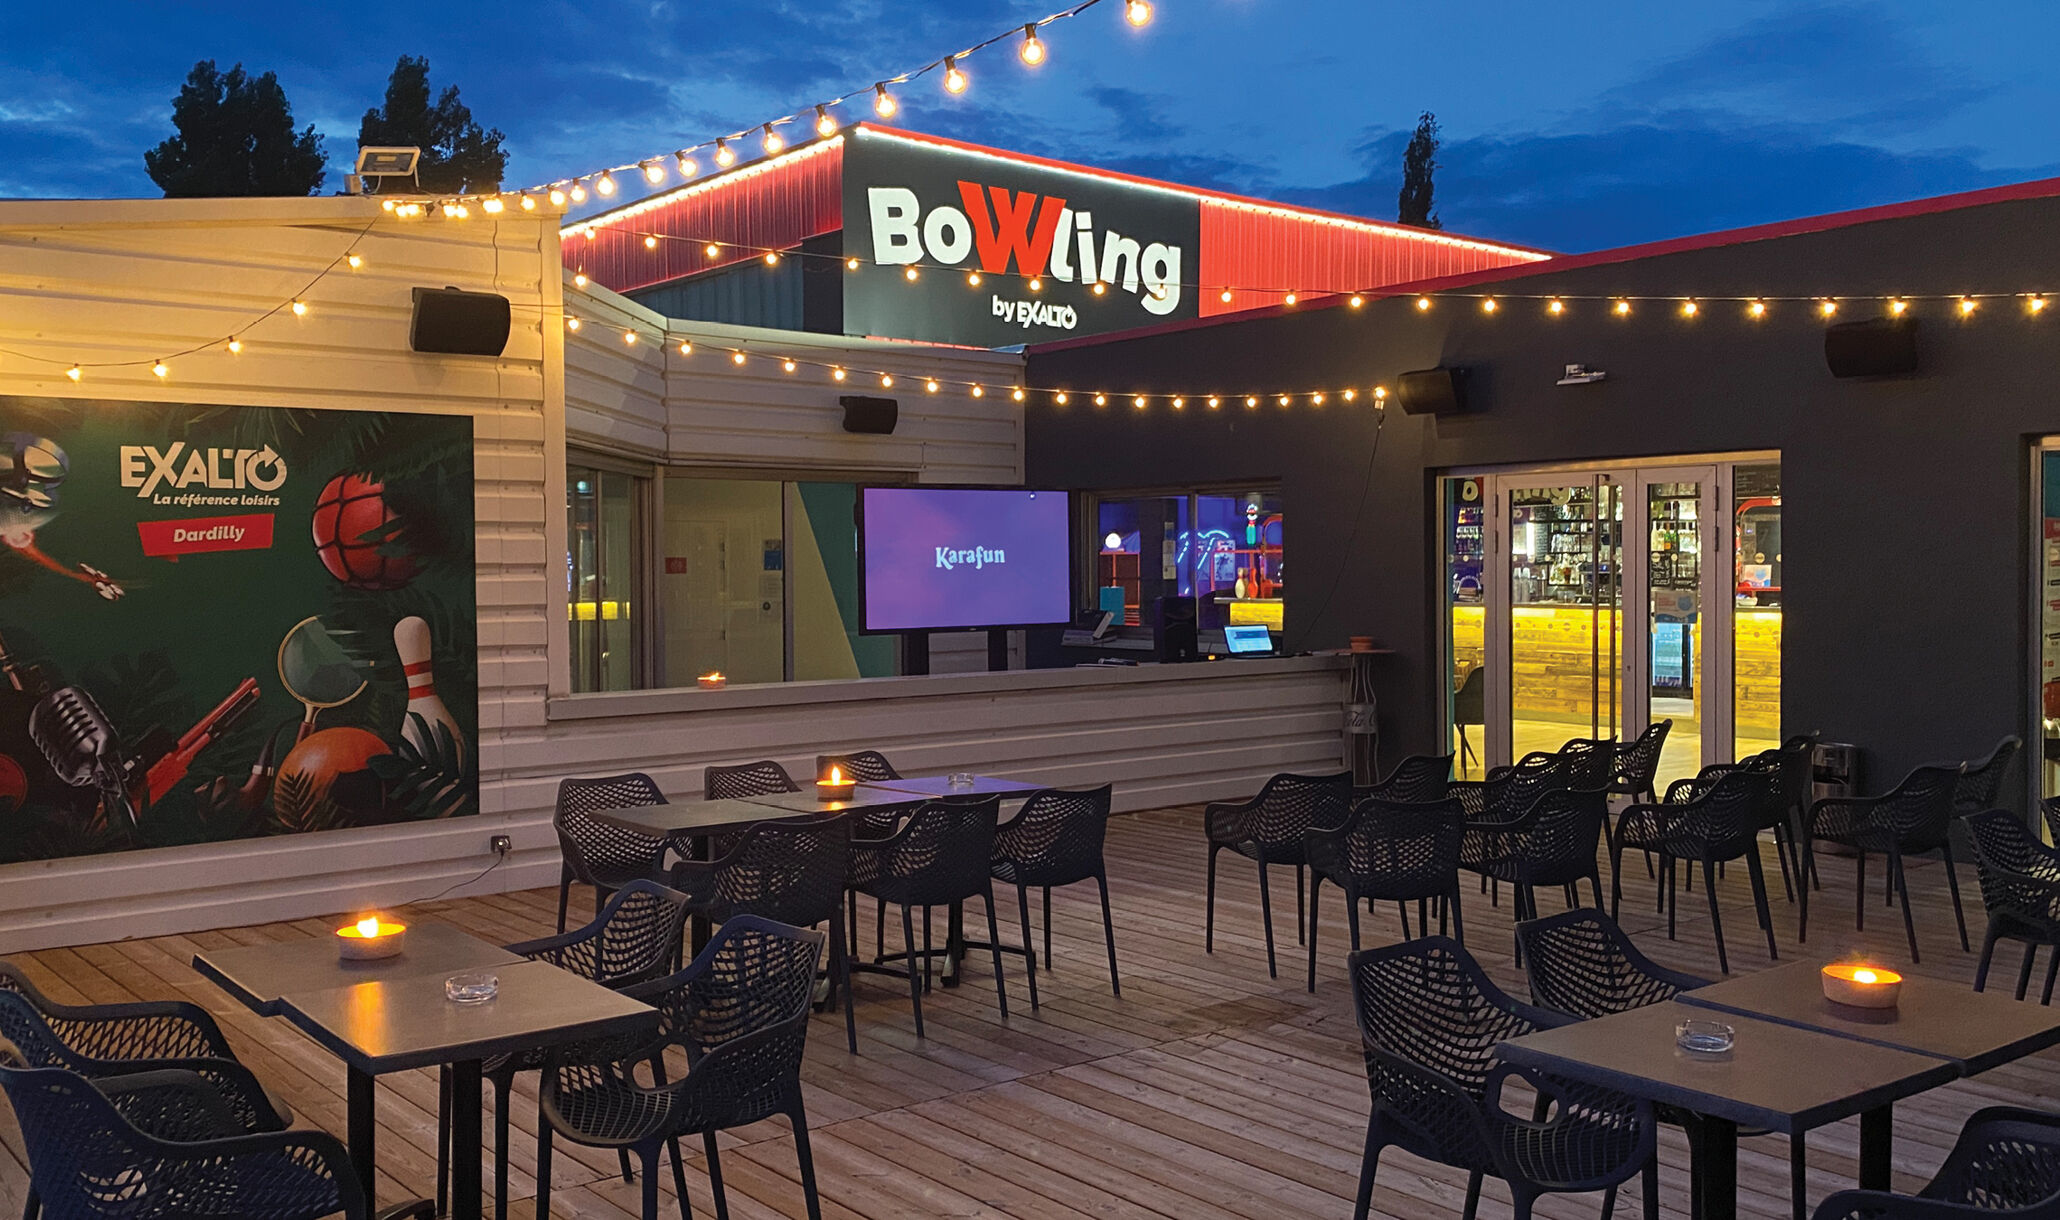 Bowling by Exalto, Dardilly, France - Dusk on the Patio-1